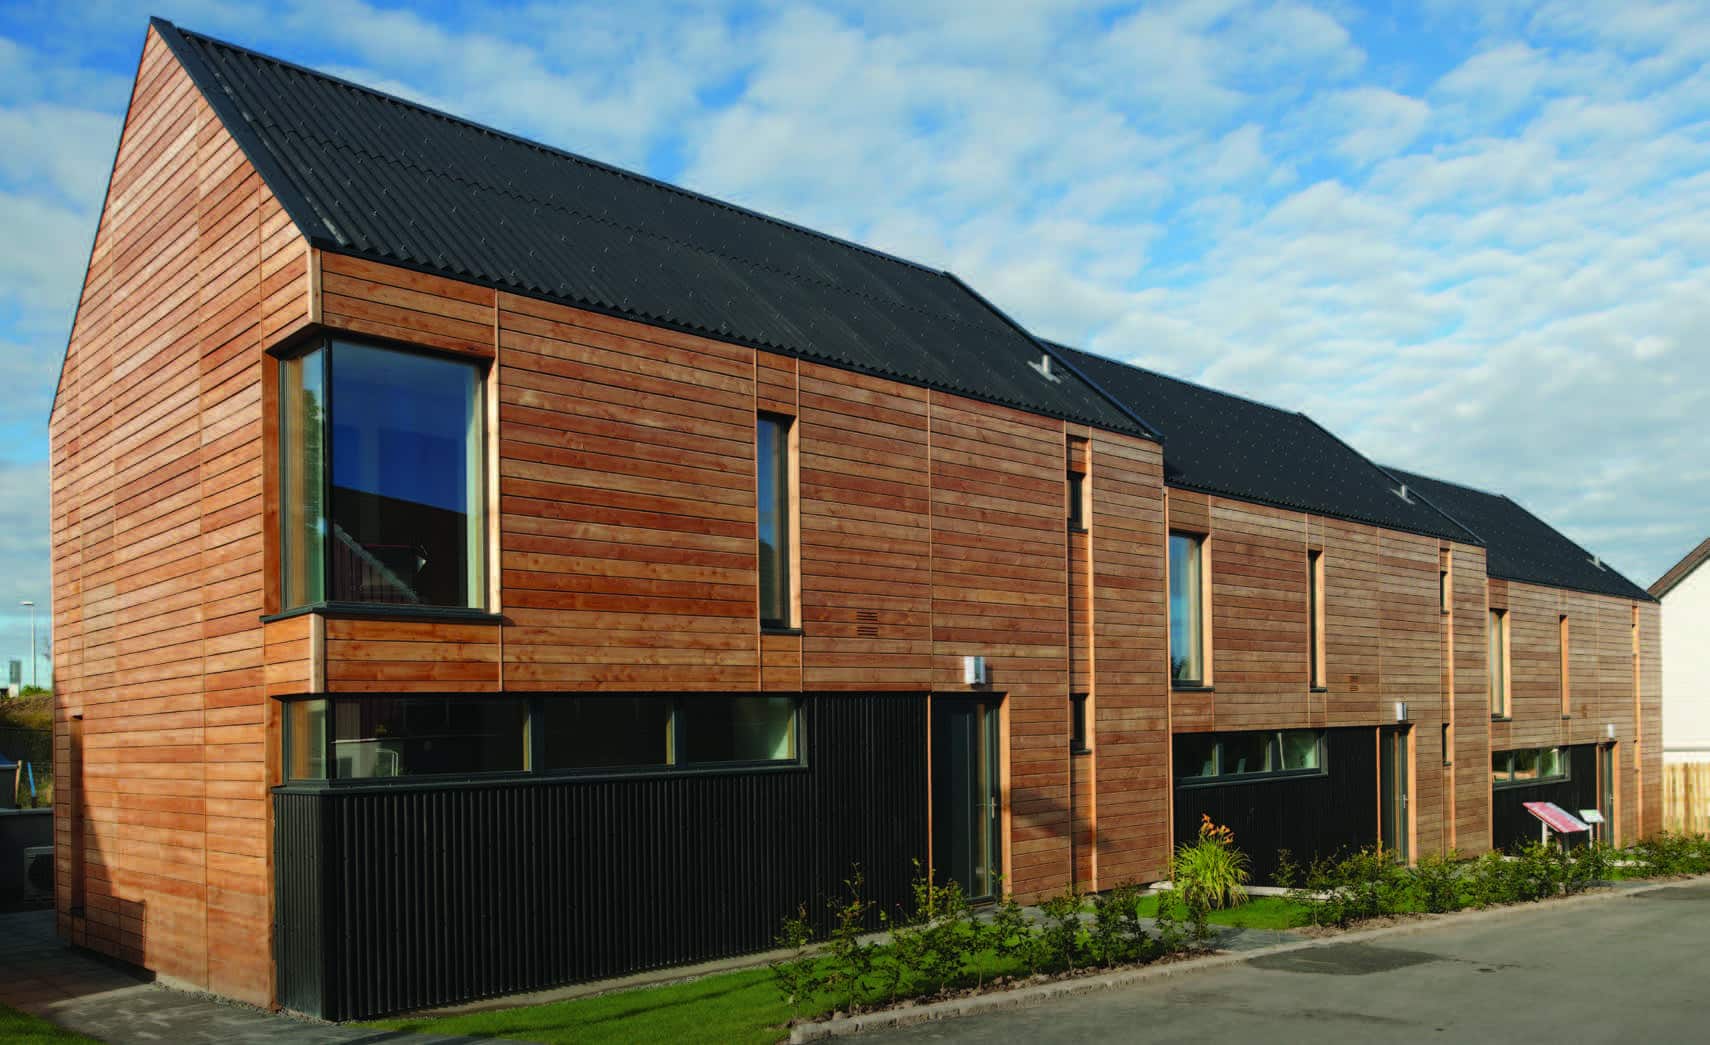 A row of houses with reddish brown timber façade, black vertical timber on the first floor and black corrugated roof. 